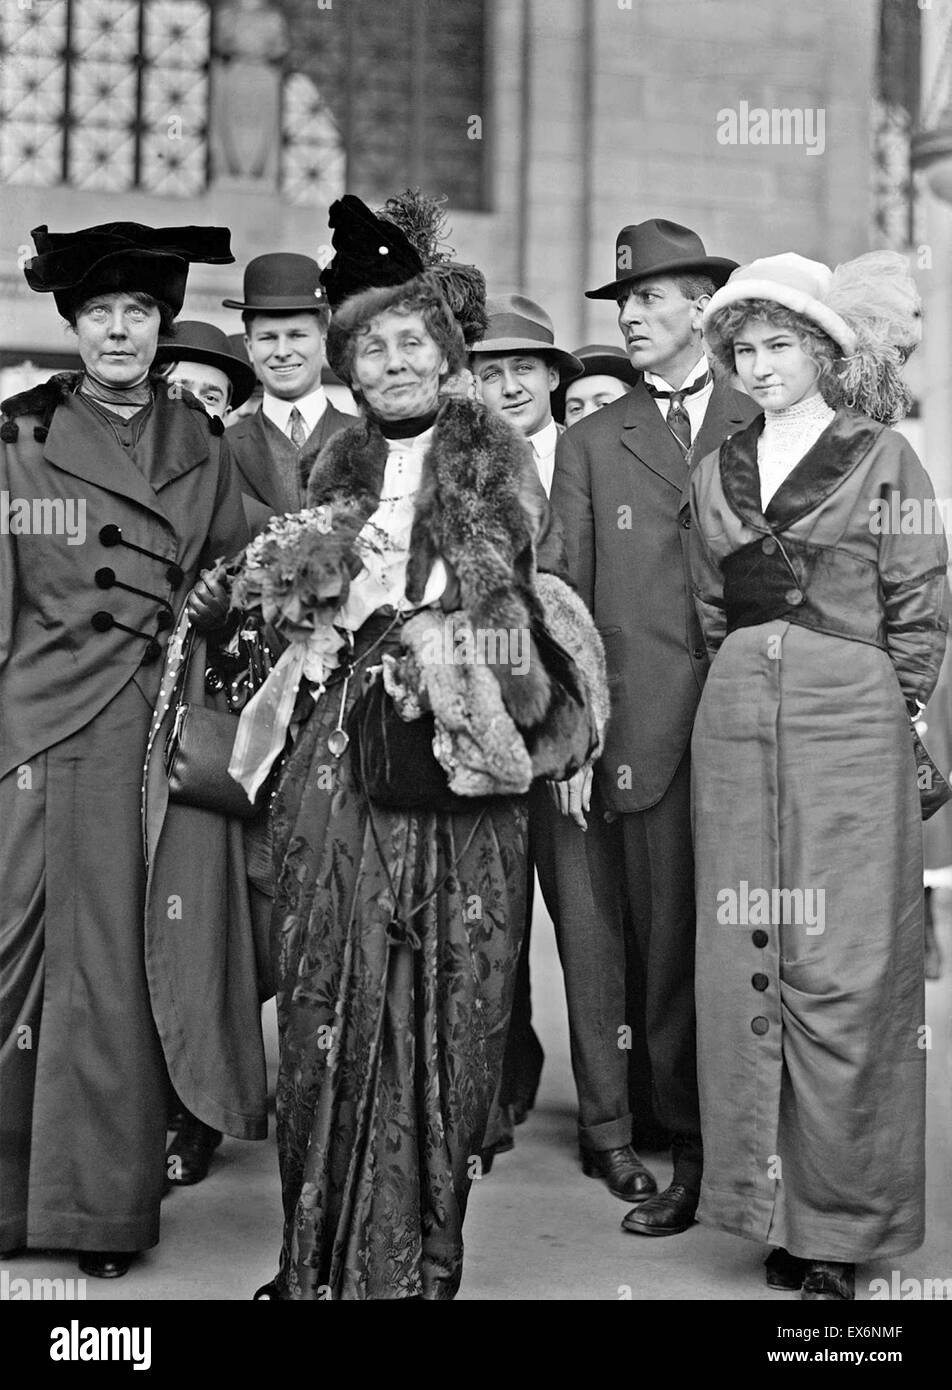 American suffragette, Miss Lucy Burns of C.U.W.S., left, with Mrs. Emmeline Pankhurst Stock Photo